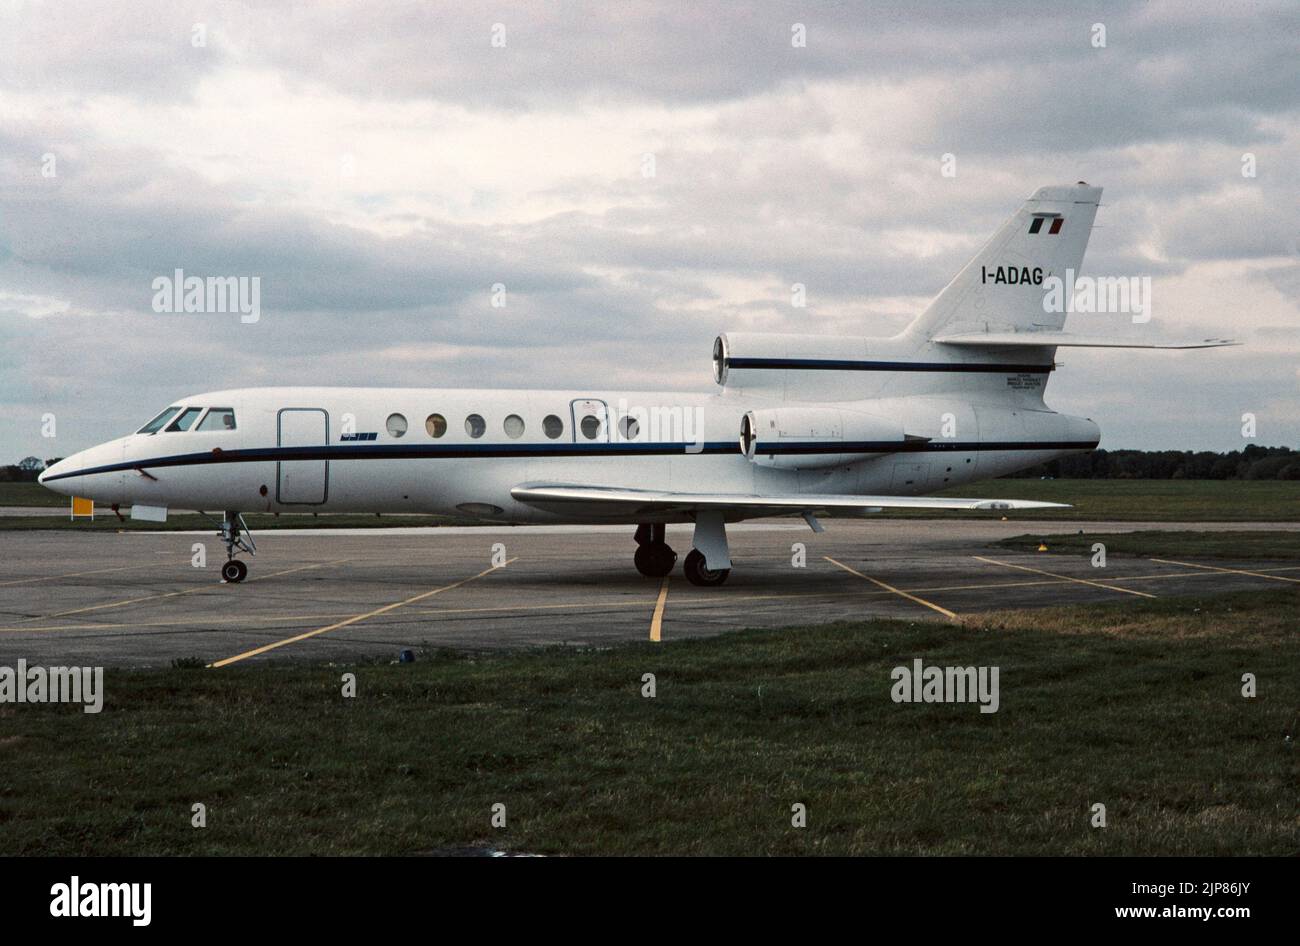 A Dassault Falcon 50 Business, corporate, private, executive Jet, registered in Italy as I-ADAG. Photo taken at Hatfield Airport in UK in 1989. Stock Photo